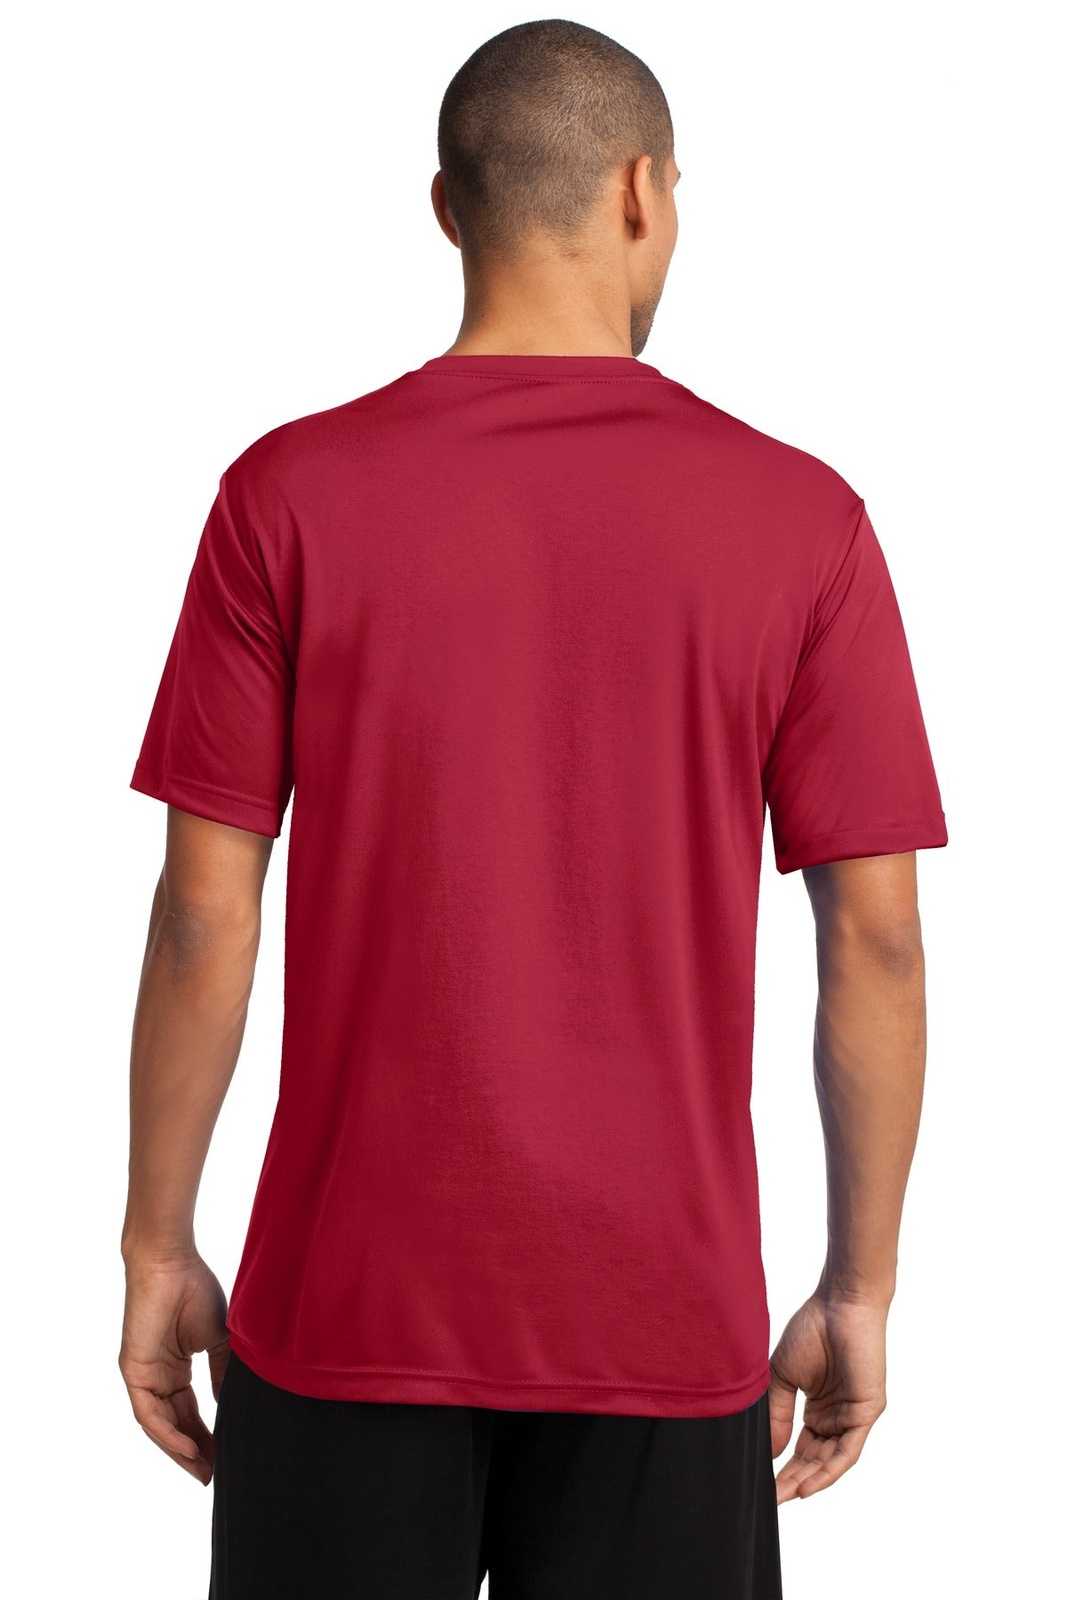 Port & Company PC380 Performance Tee - Red - HIT a Double - 1